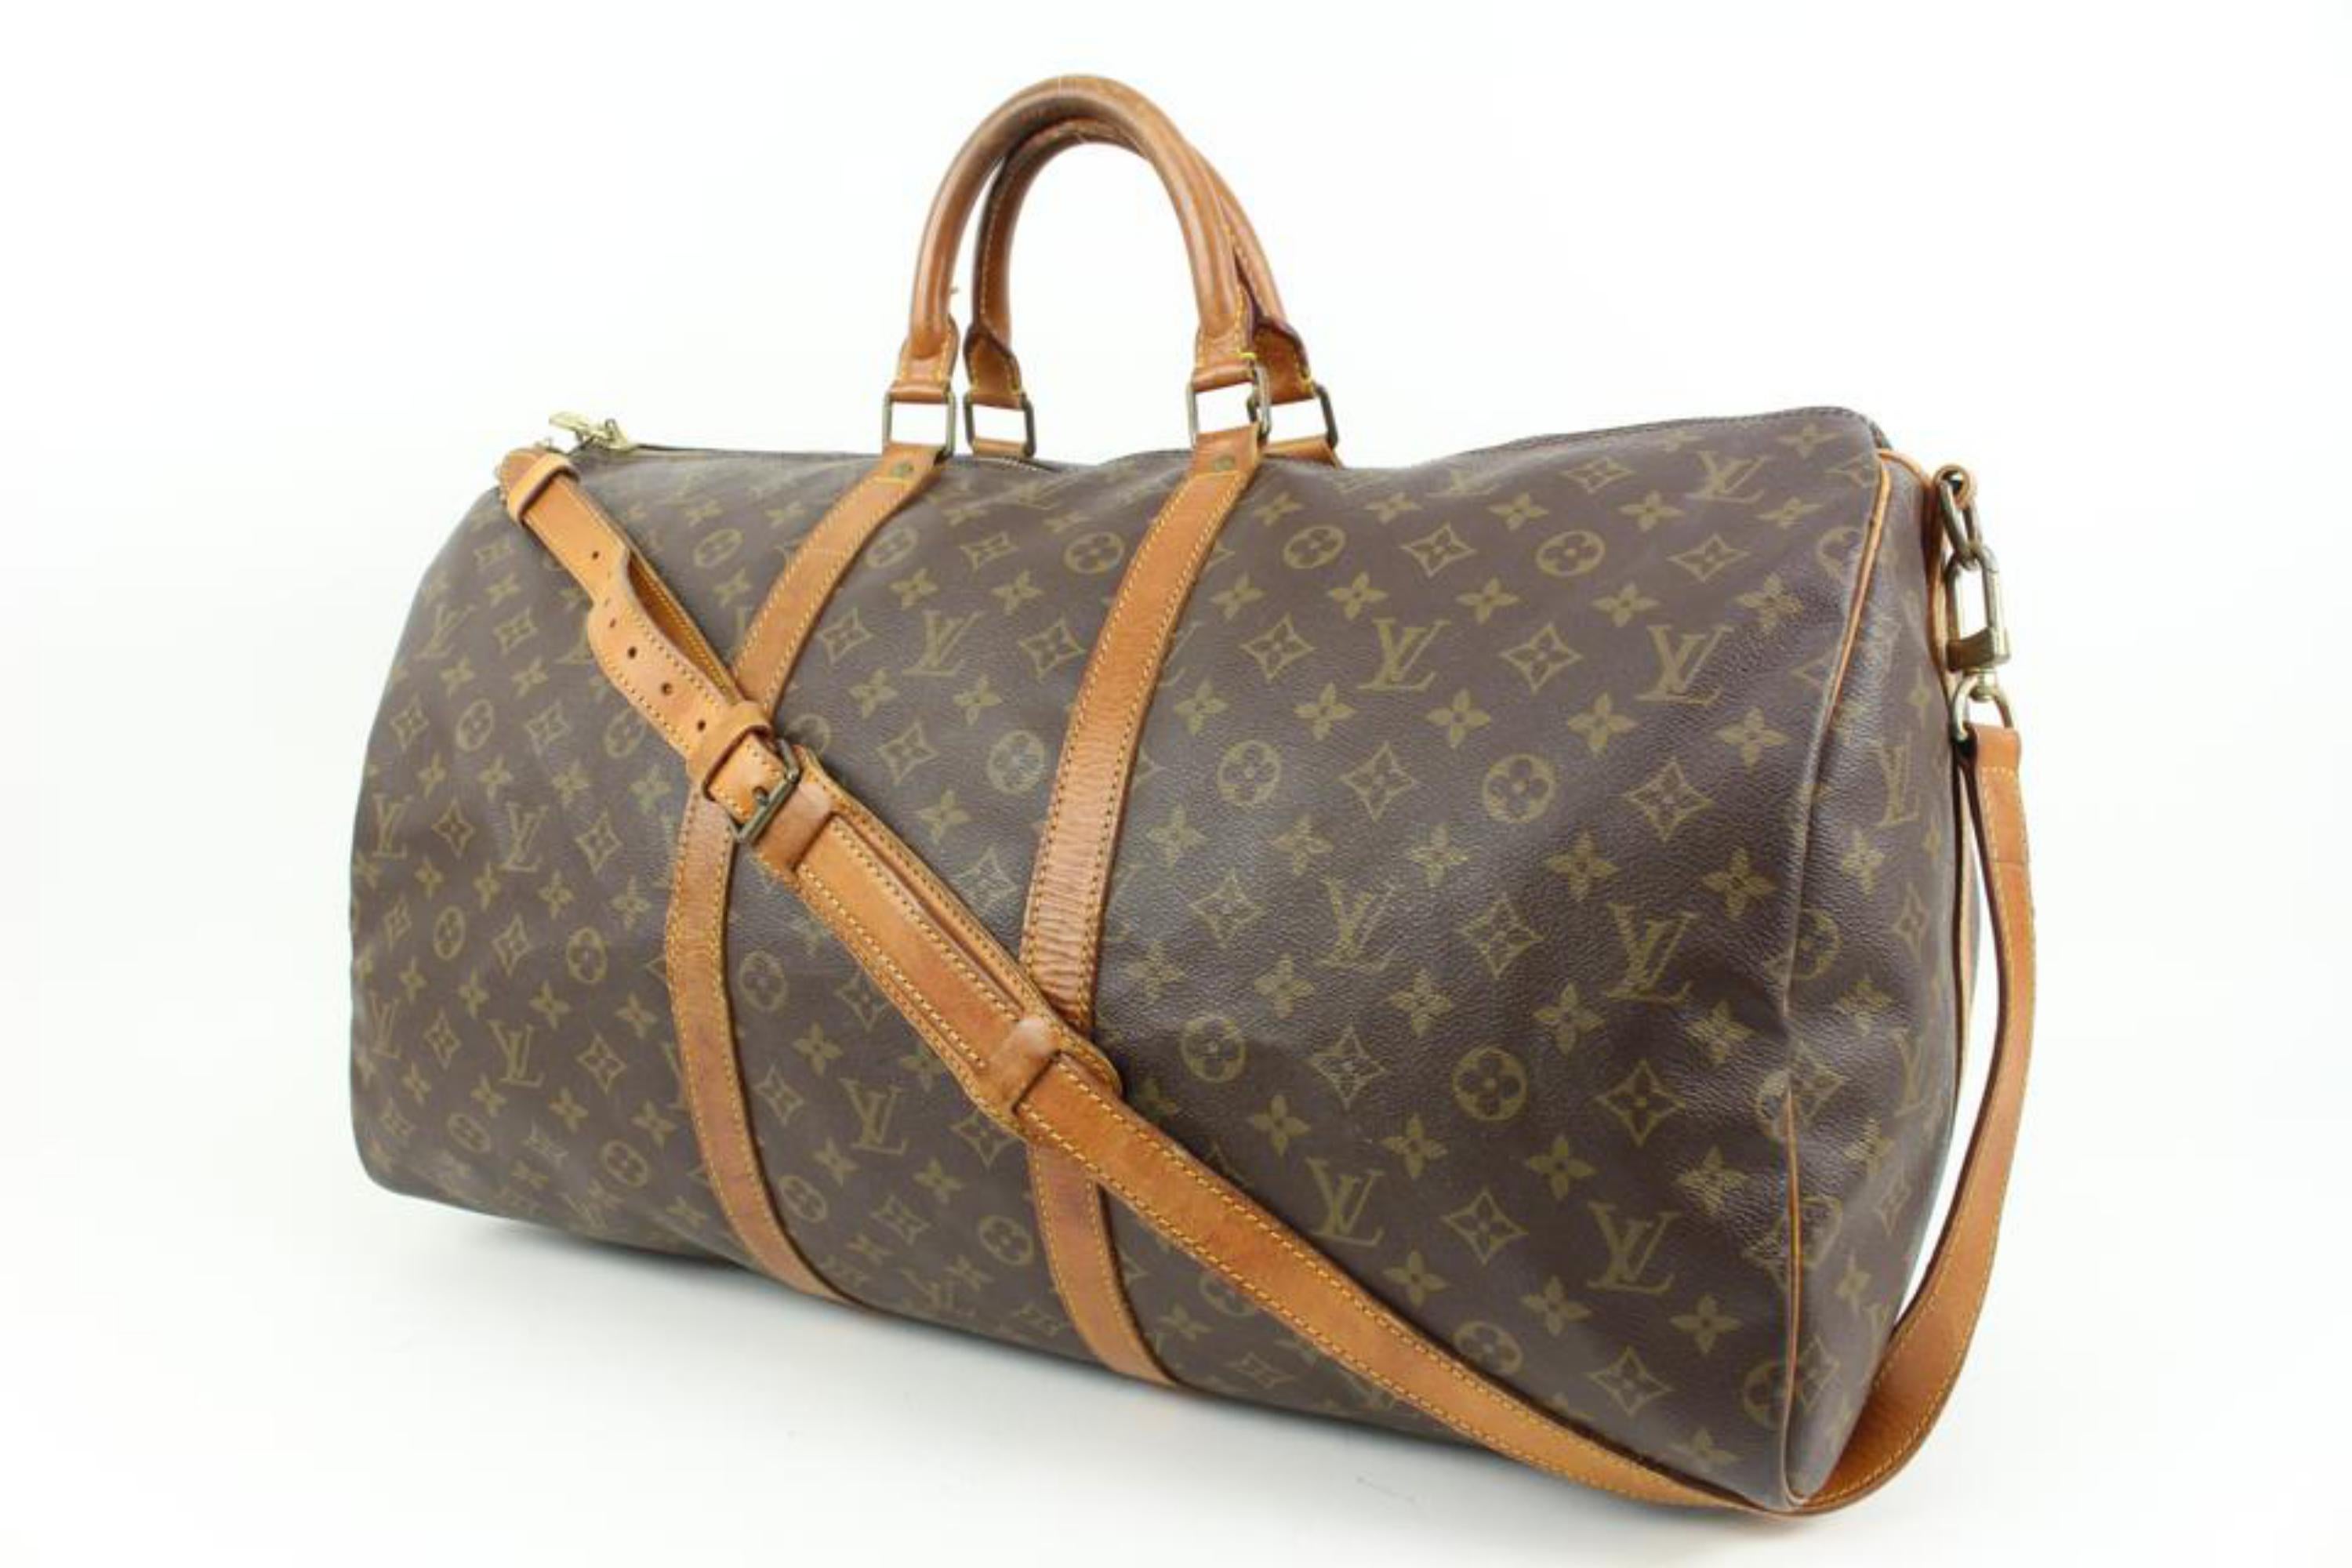 Louis Vuitton Monogram Keepall Bandouliere 55 Duffle Bag with Strap 43lz413s
Date Code/Serial Number: VI883
Made In: France
Measurements: Length:  21.5